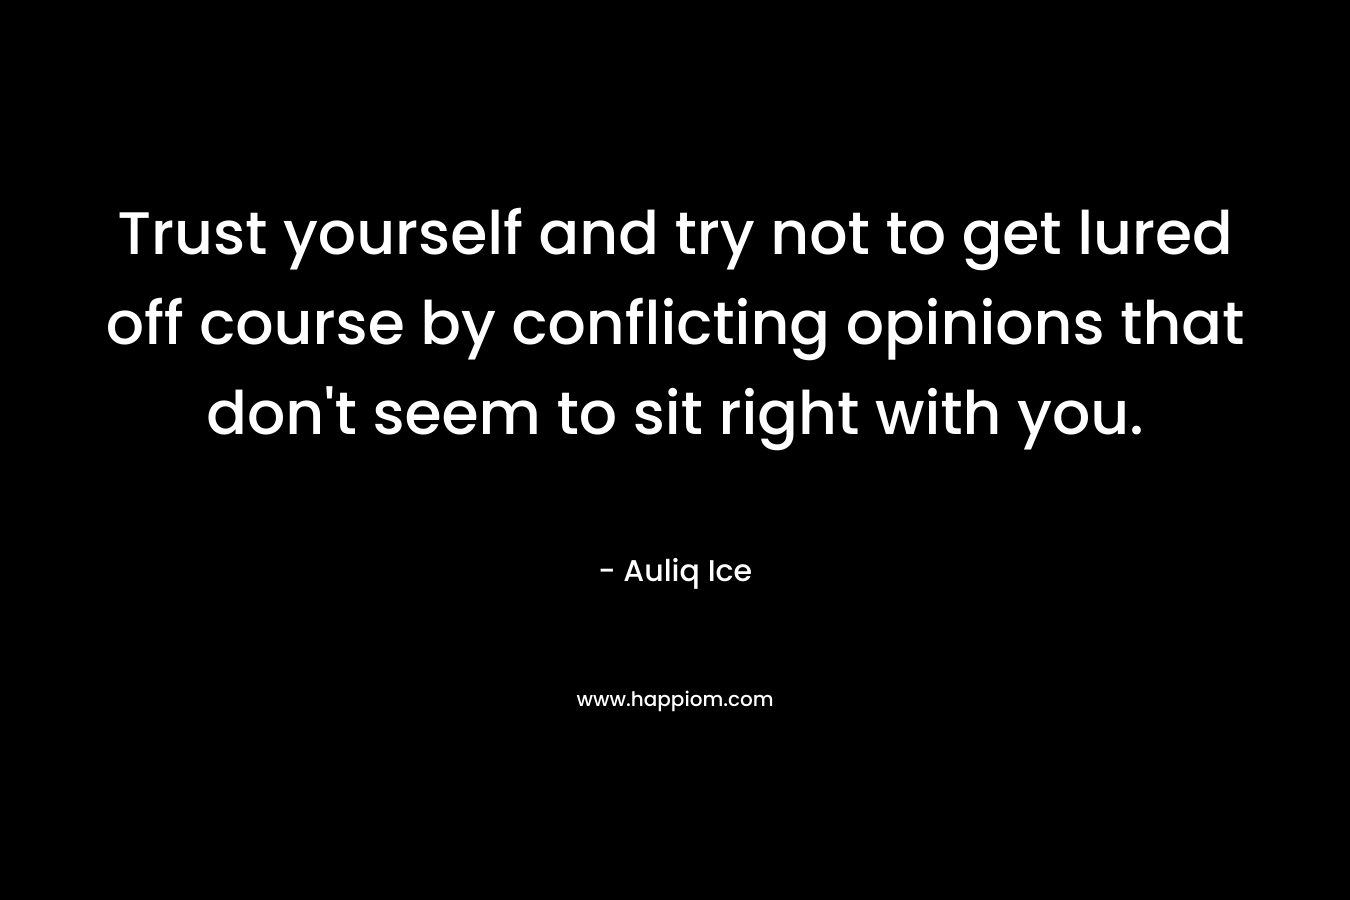 Trust yourself and try not to get lured off course by conflicting opinions that don't seem to sit right with you.